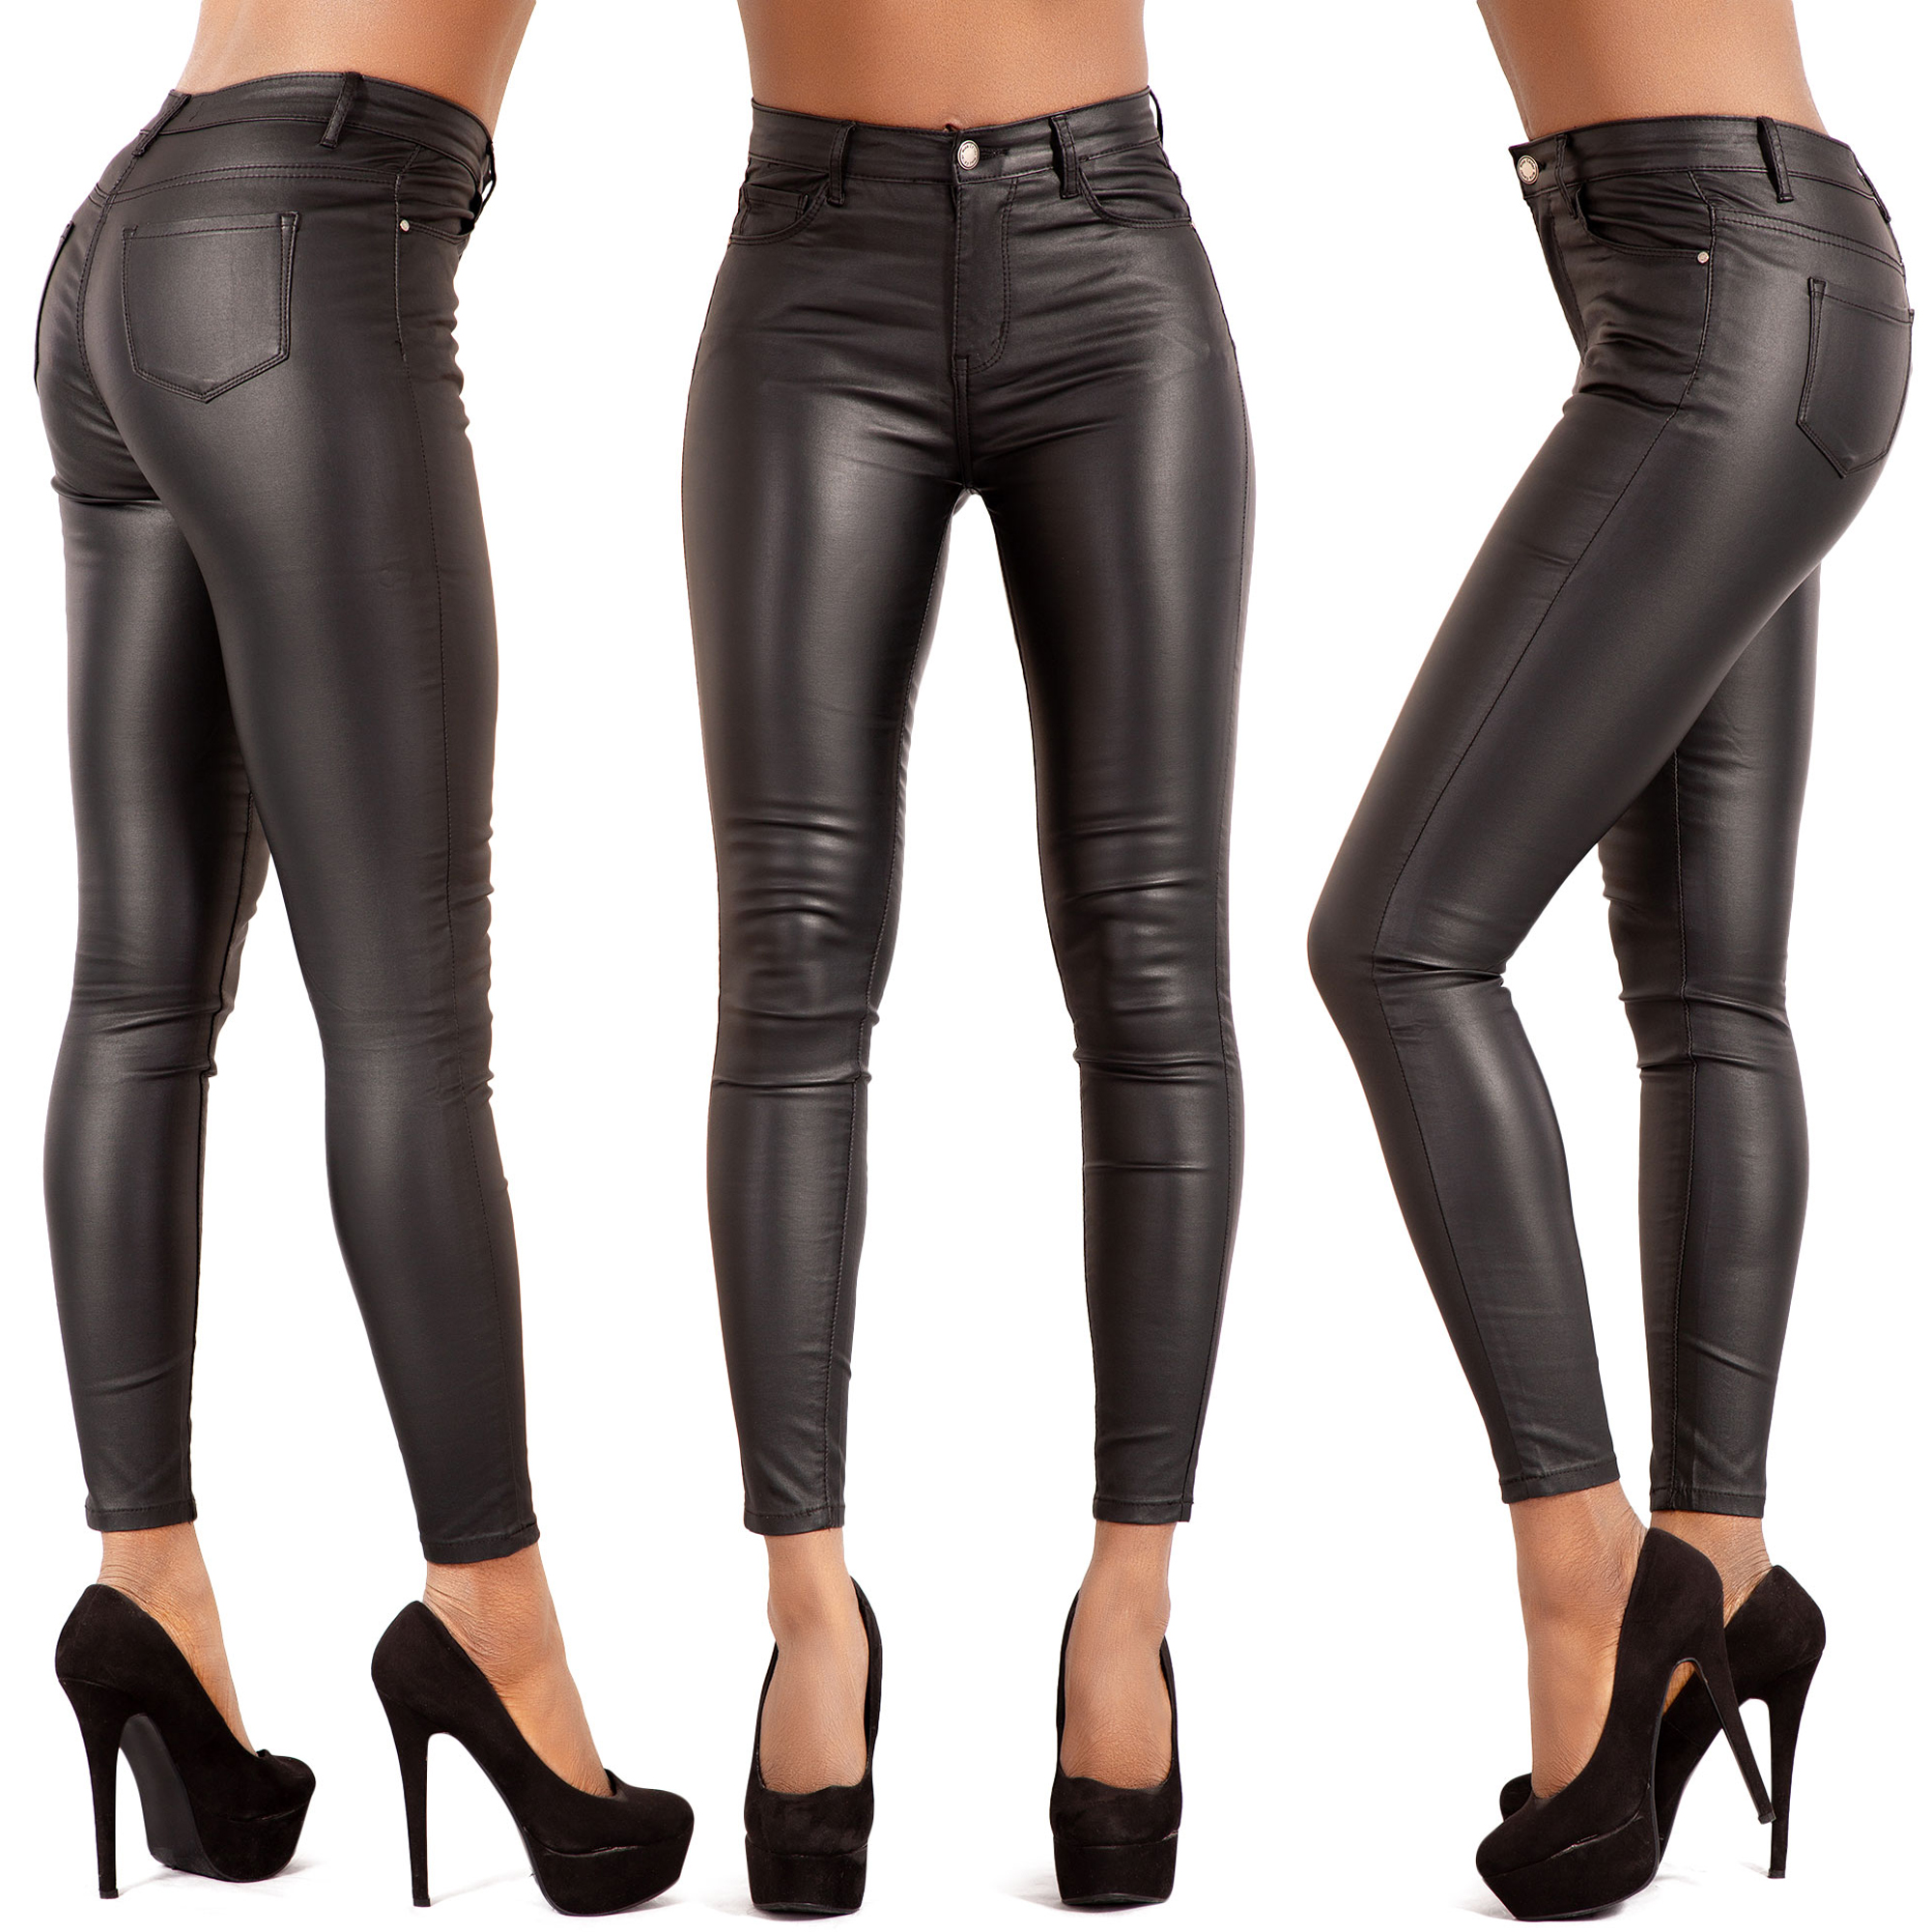 Women's leather leggings KAYLA with Super Push-Up effect